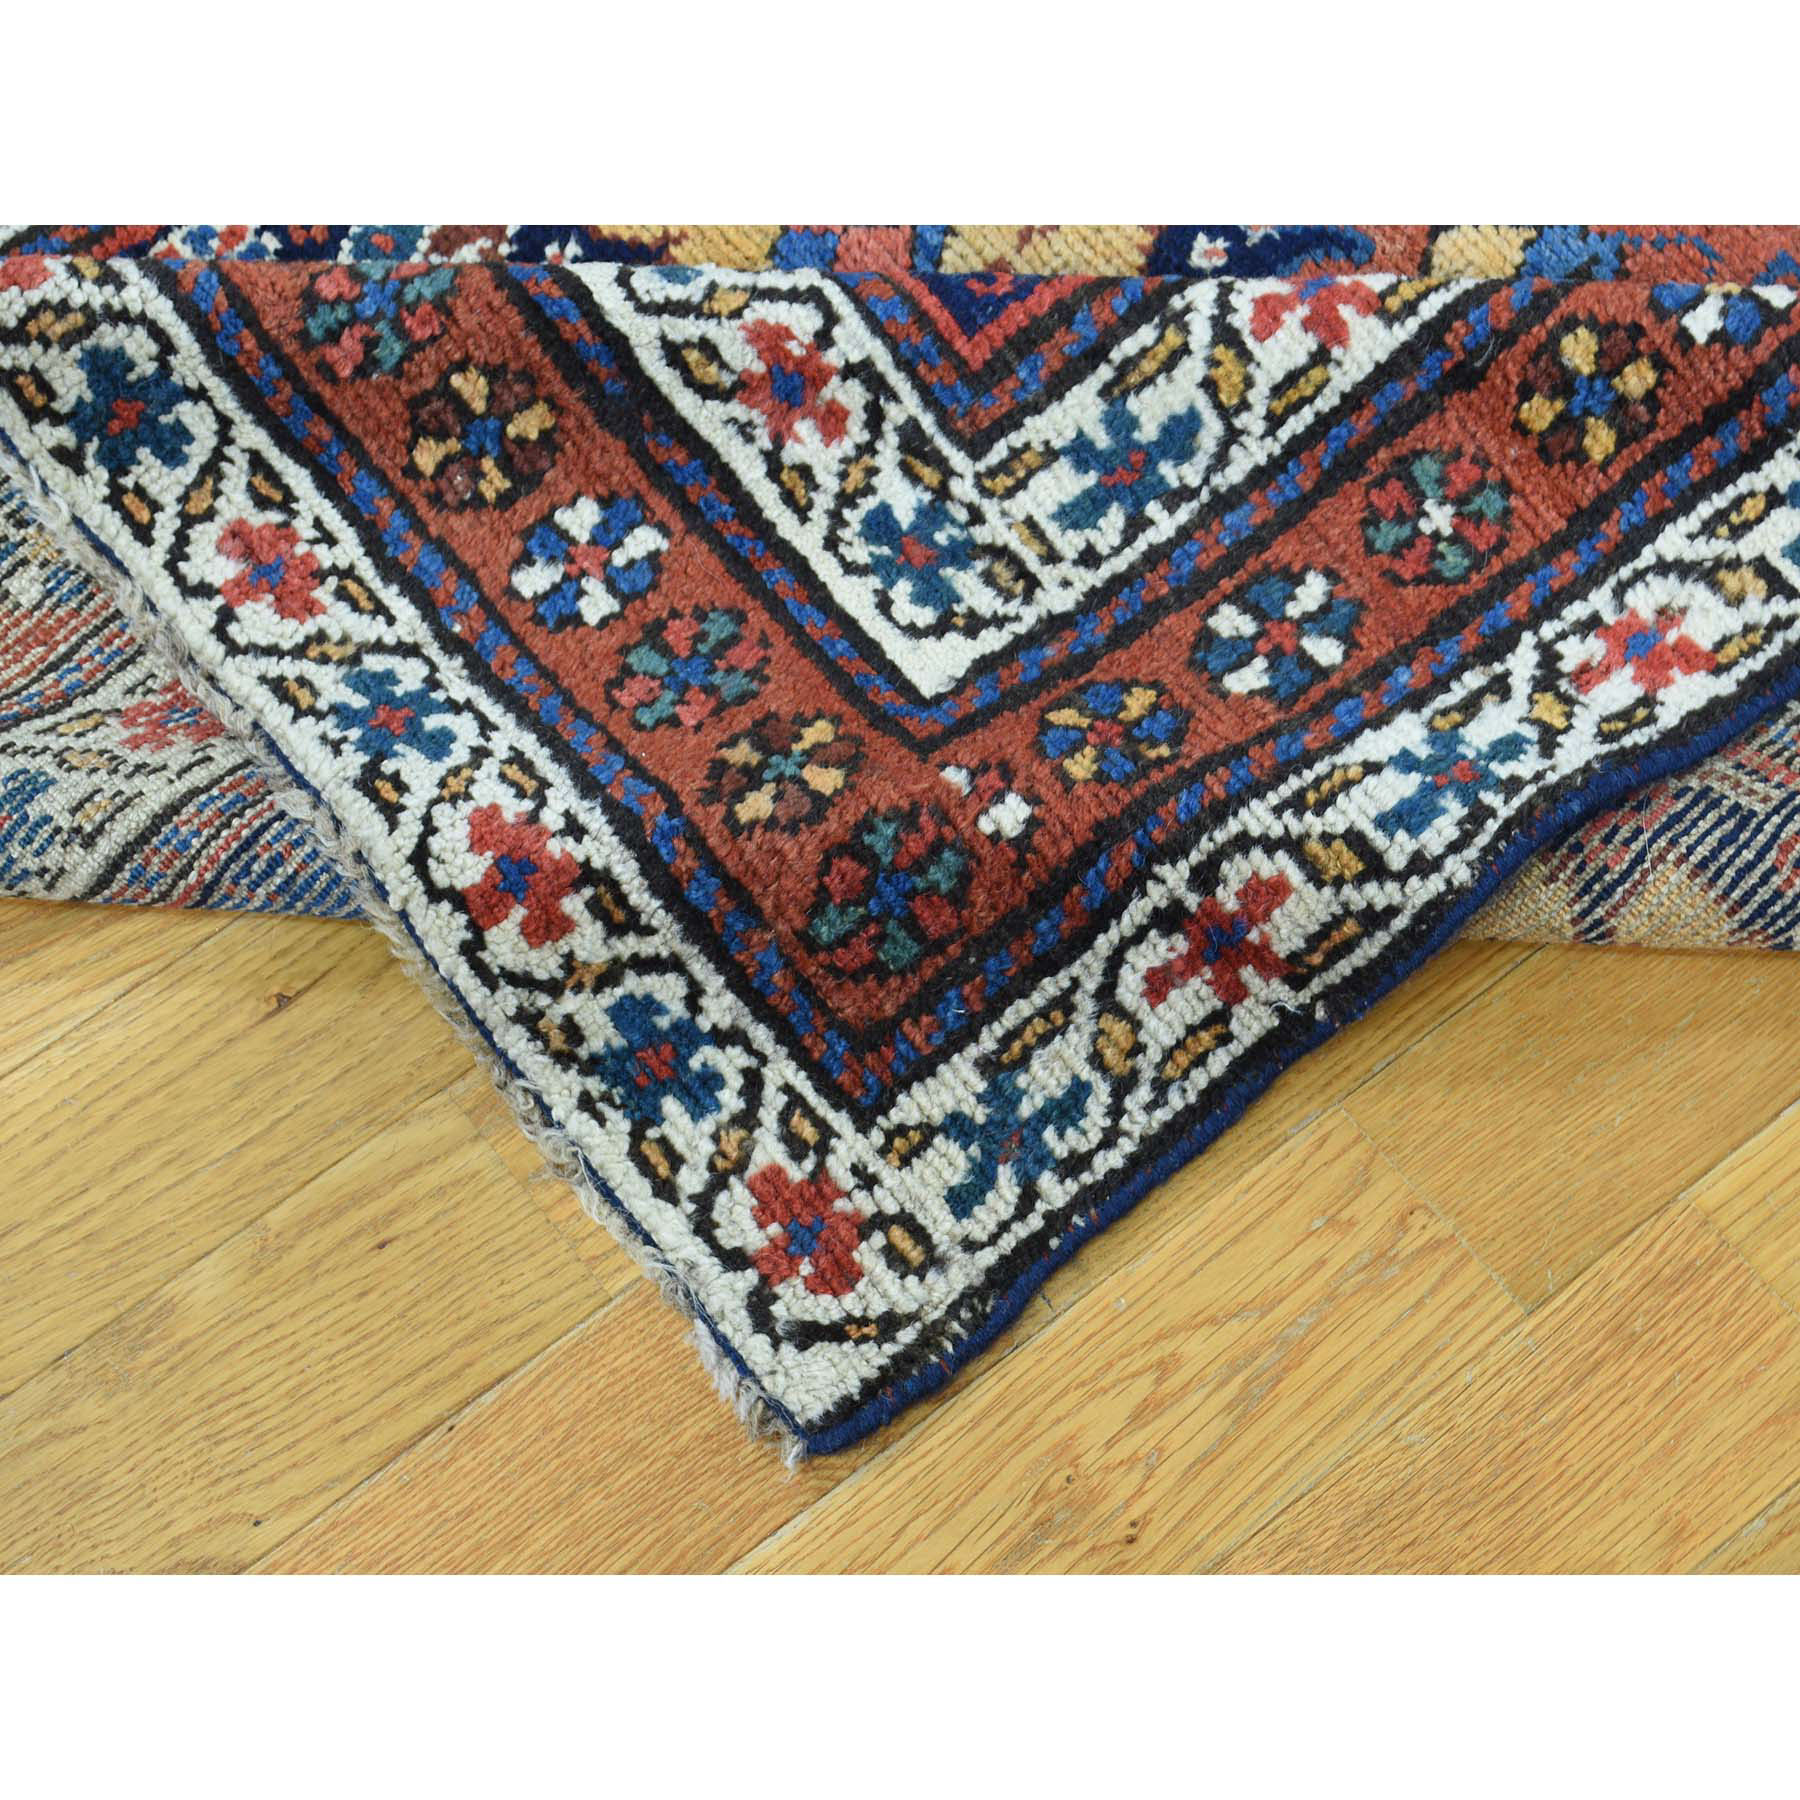 3'5"x12'9" Full Pile Antique Mint Condition Northwest Persian Wide Runner 